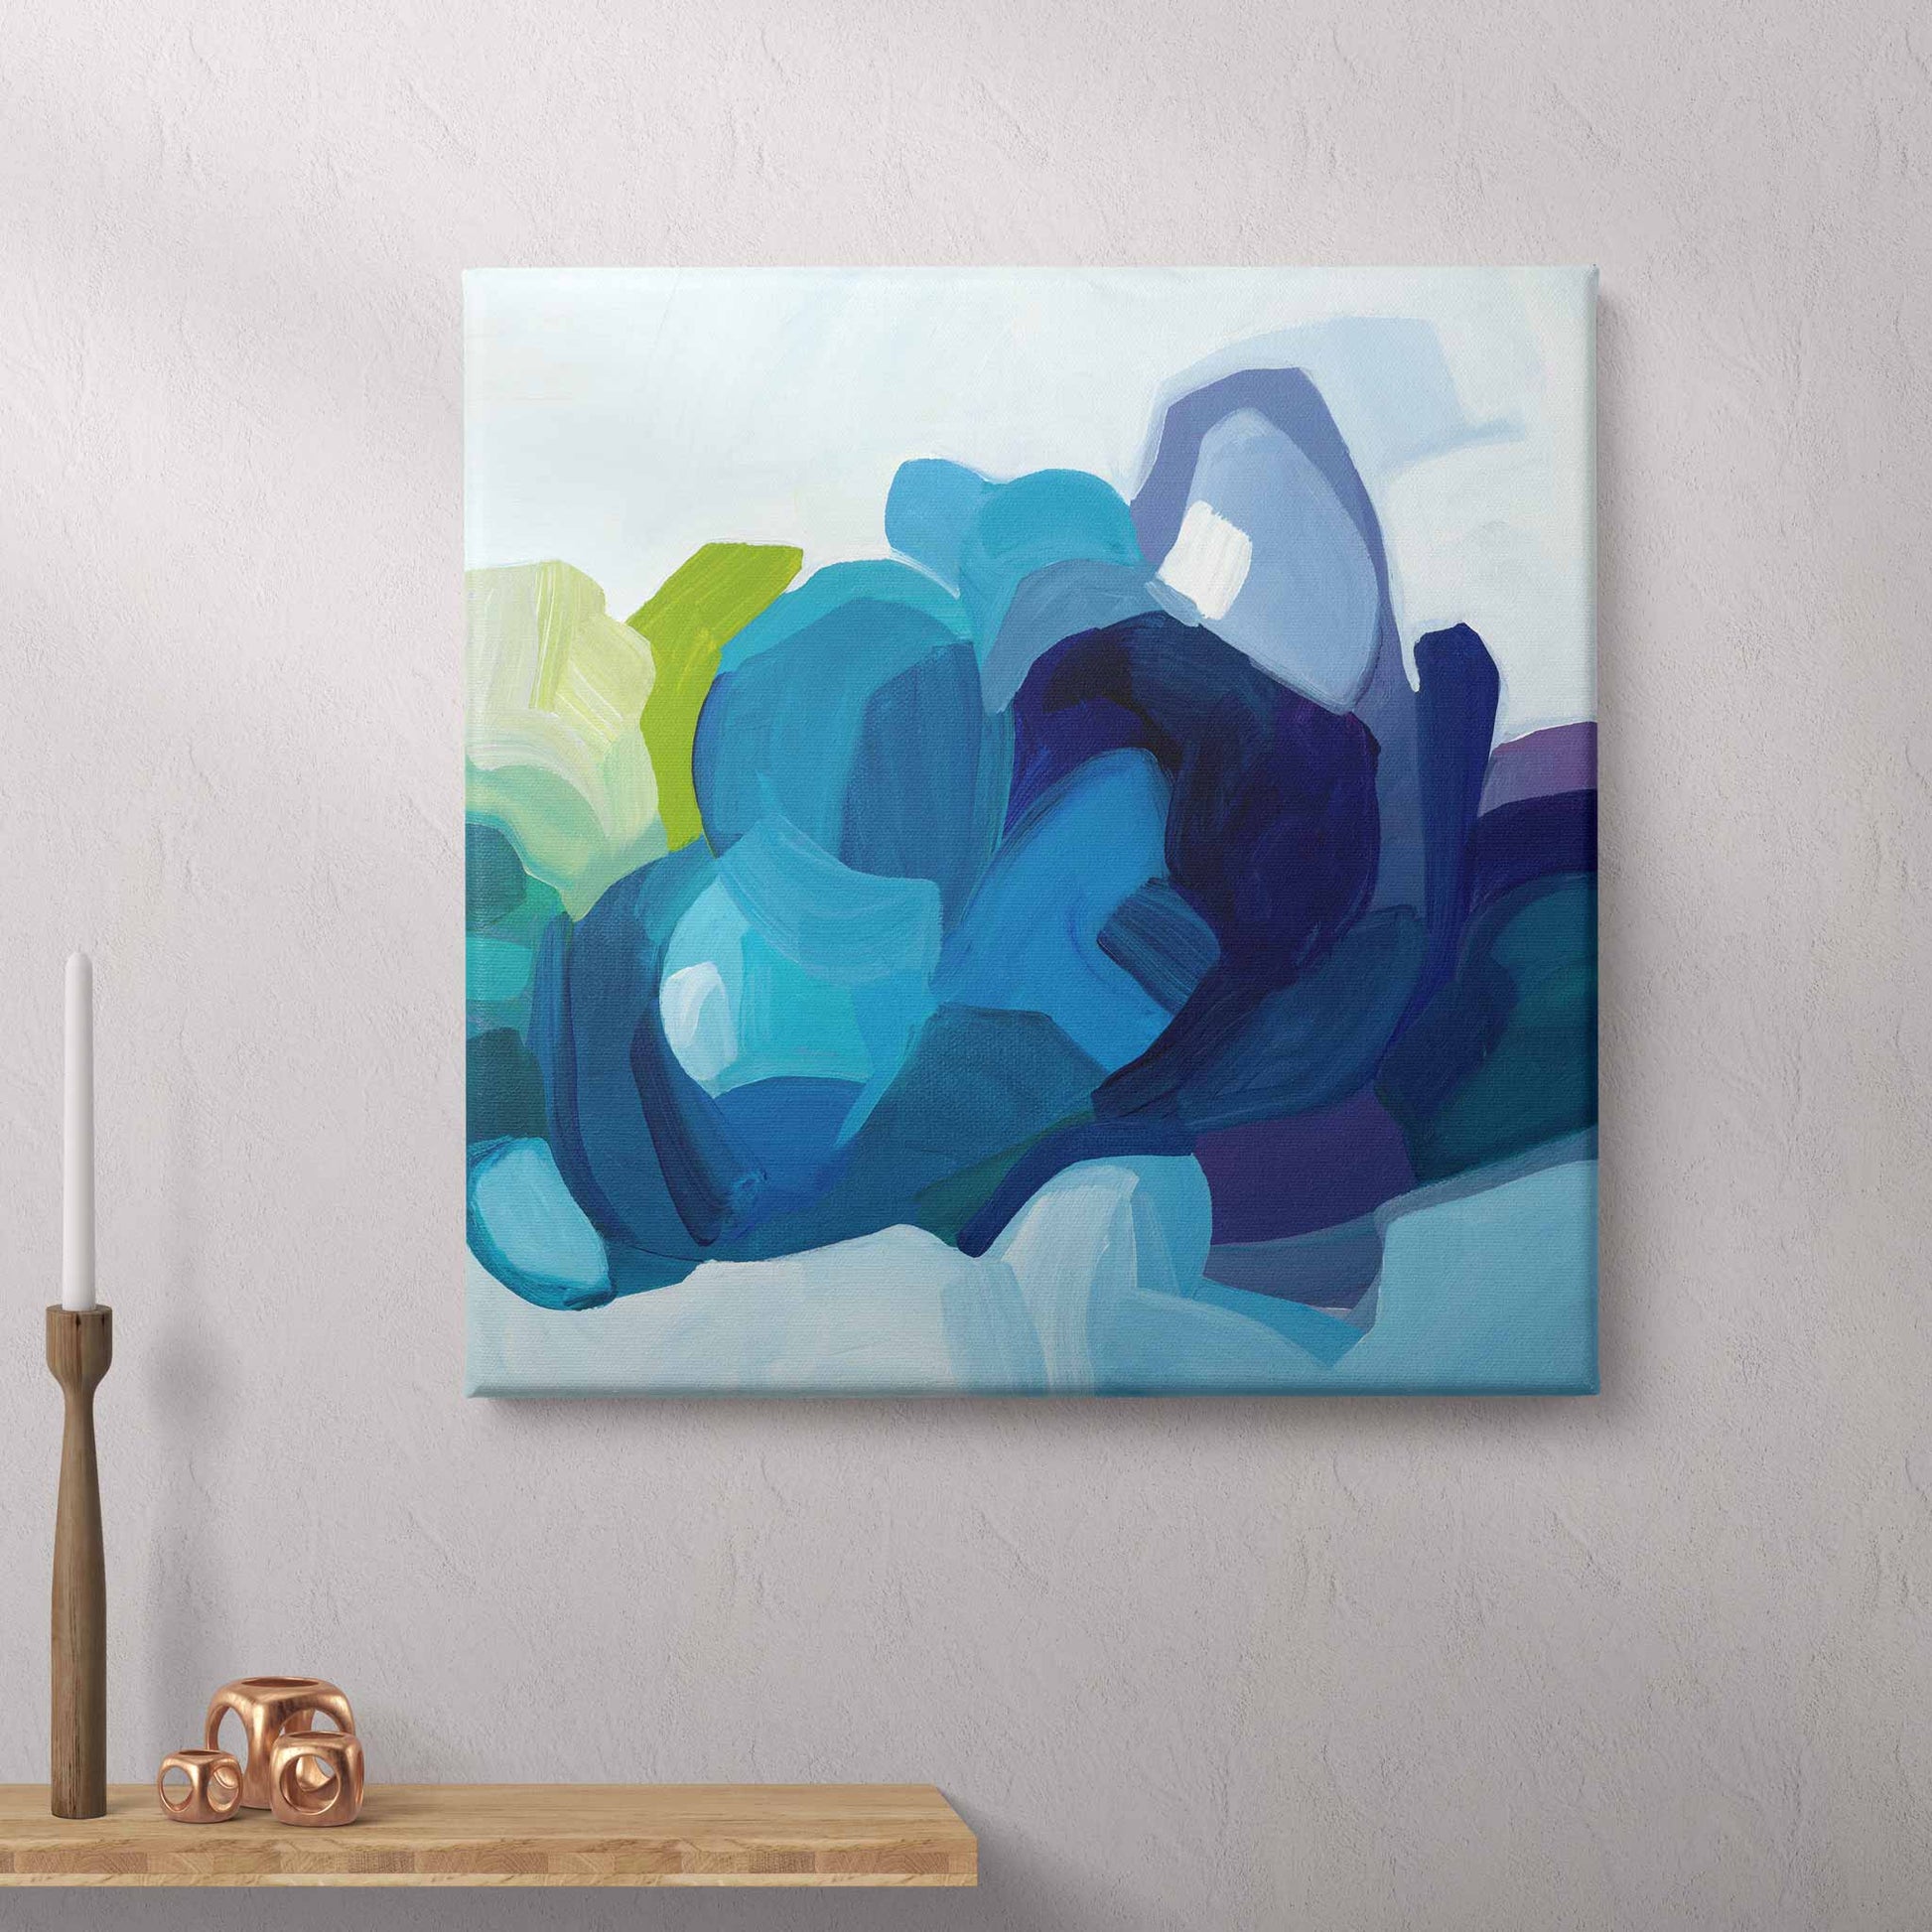 blue and white abstract painting recreated as a canvas art print by Canadian artist Susannah Bleasby